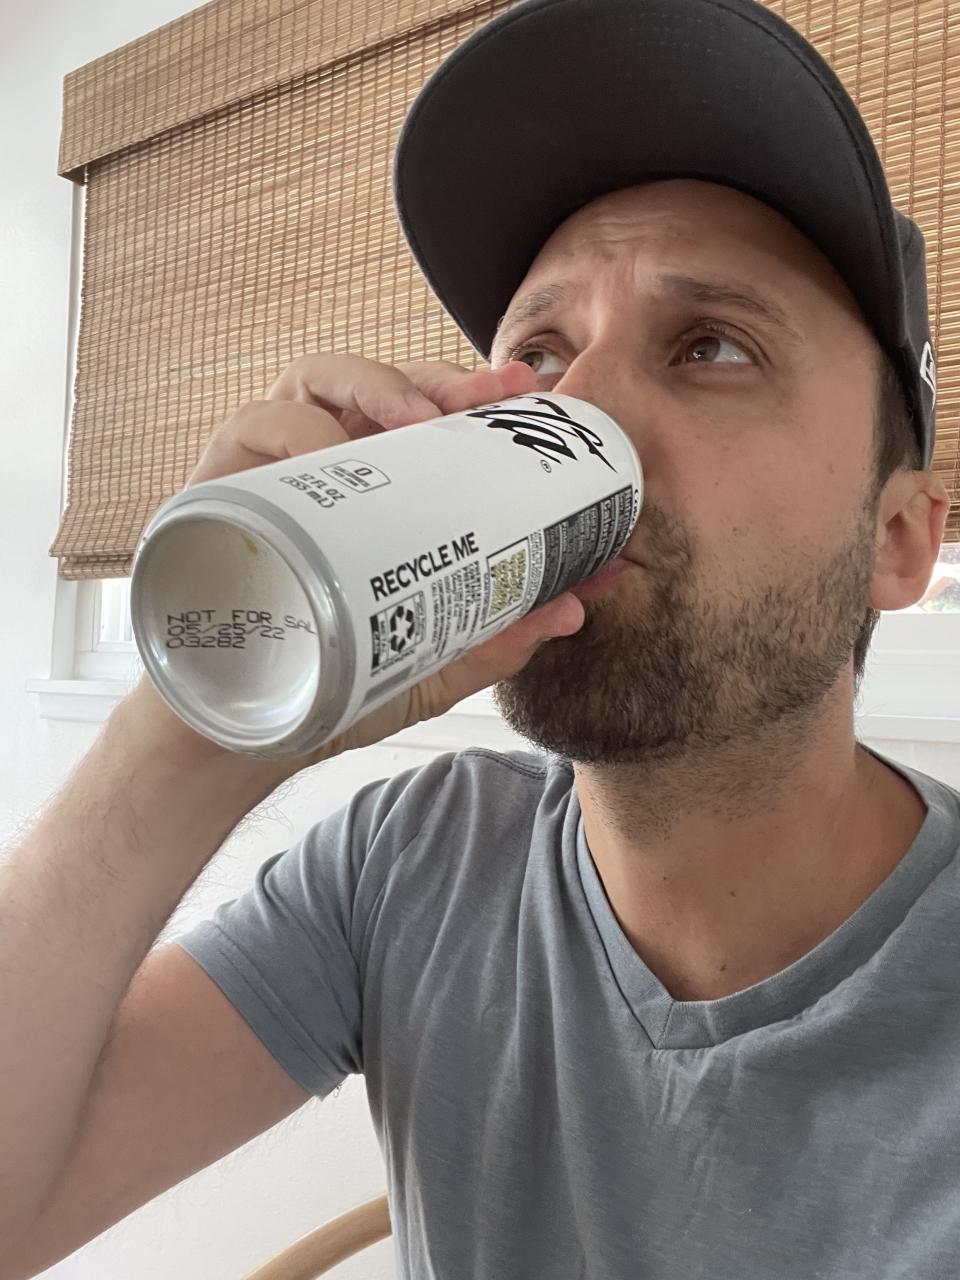 The author taking a sip of the soda from the can